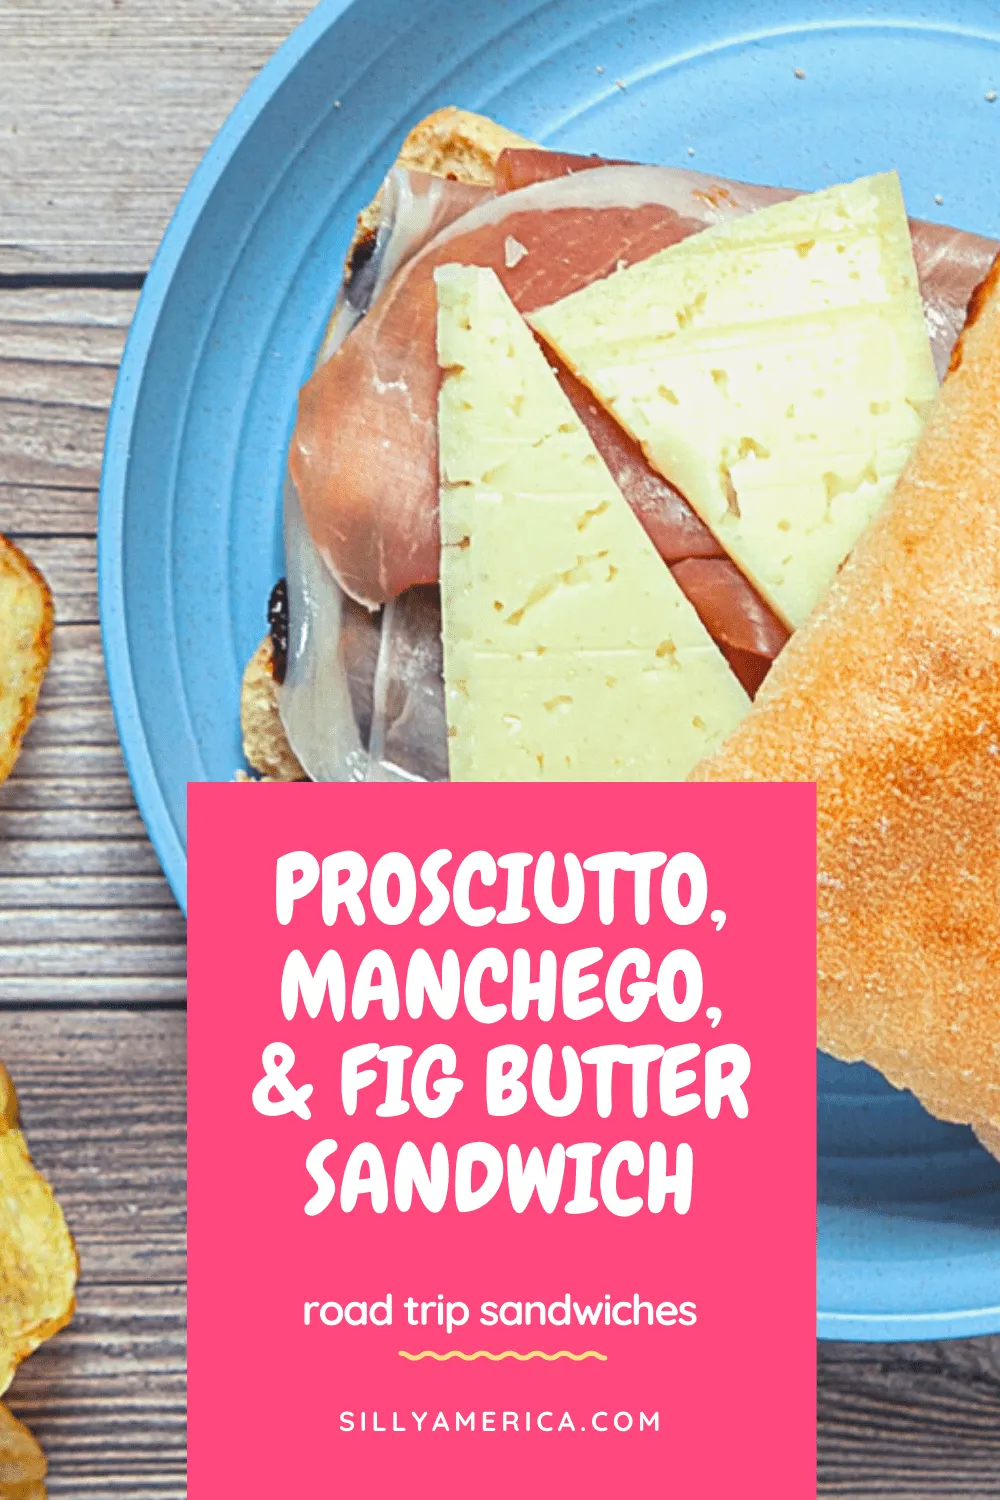 This road trip sandwich combines buttery prosciutto, creamy Manchego cheese, and sweet Fig butter for a lunch option destined for a picnic in a park. Ciabatta rolls make great bread for road trip sandwiches because the hardy texture holds up during travel. #RoadTripMeals #RoadTripMealsForAdults #RoadTripMealsToPack #RoadTripMealsForFamilies #MakeAheadRoadTripMeals #CheapRoadTripMeals #RoadTripLunches #EasyRoadTripMeals #RoadTripMealsForKids  #RoadFood #RoadFoodIdeas #RoadTripFood